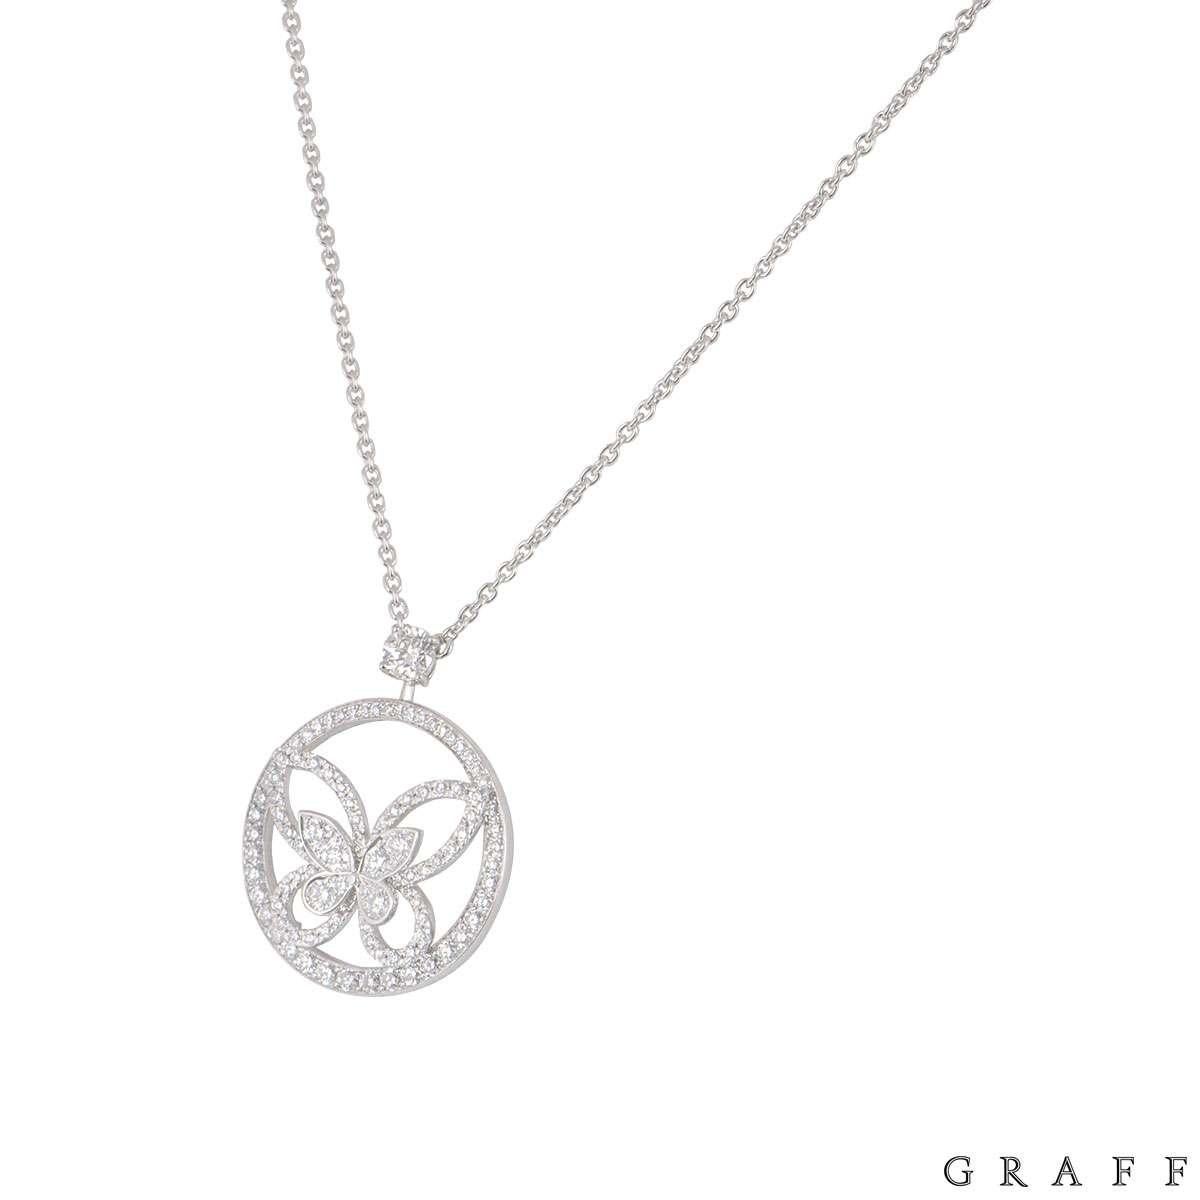 graff necklace butterfly